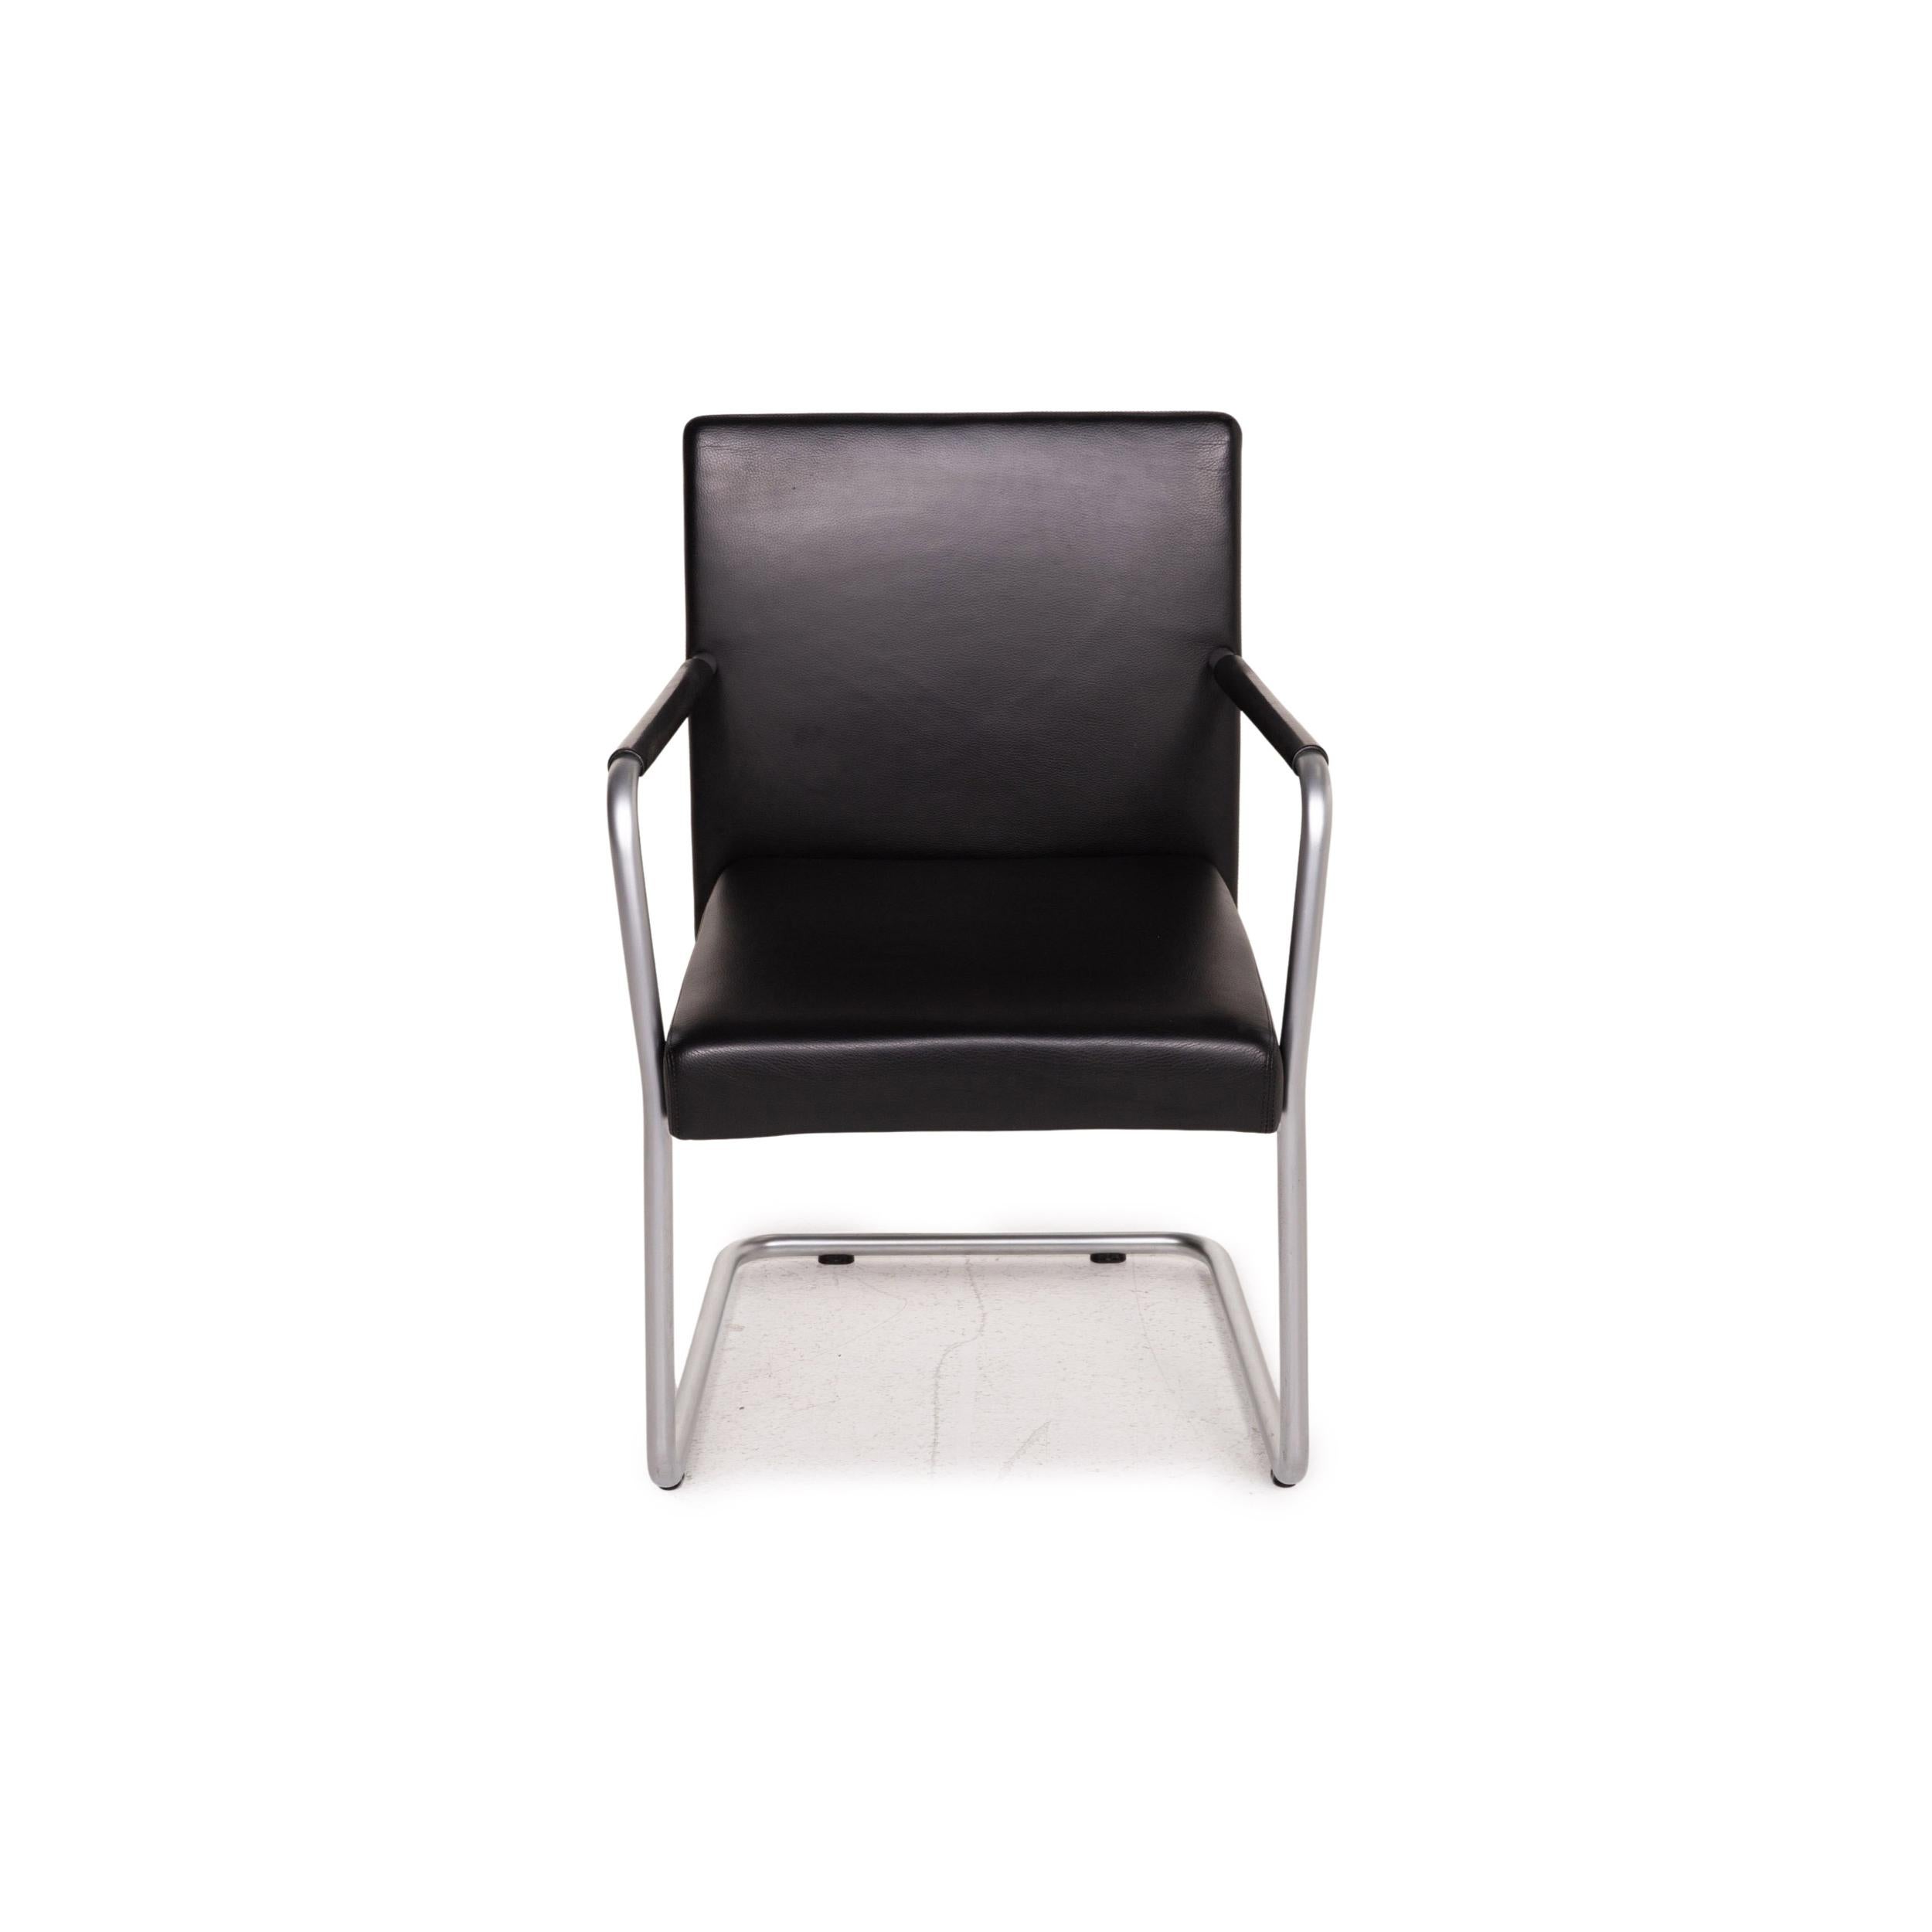 Walter Knoll Jason 1519 Leather Chair Set Black 6x Cantilever Chairs For Sale 1